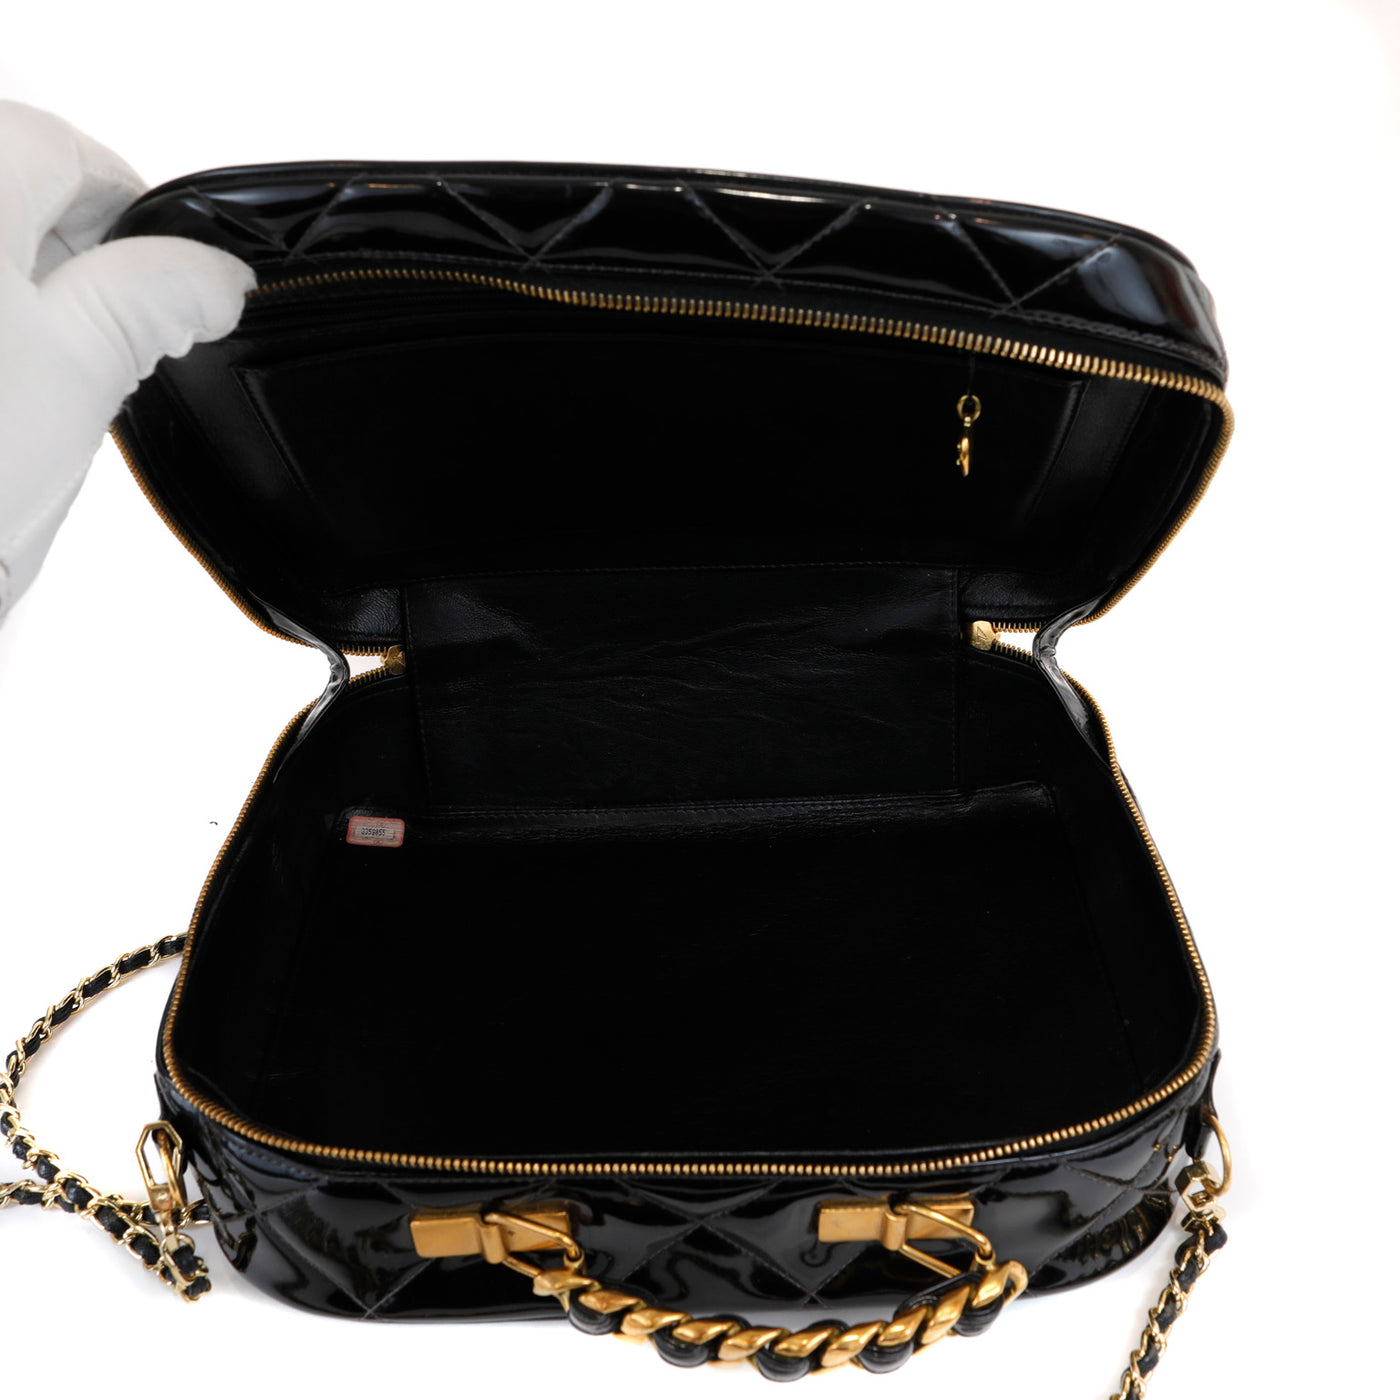 Chanel Black Patent Leather Vintage Bag with Gold Top Handle